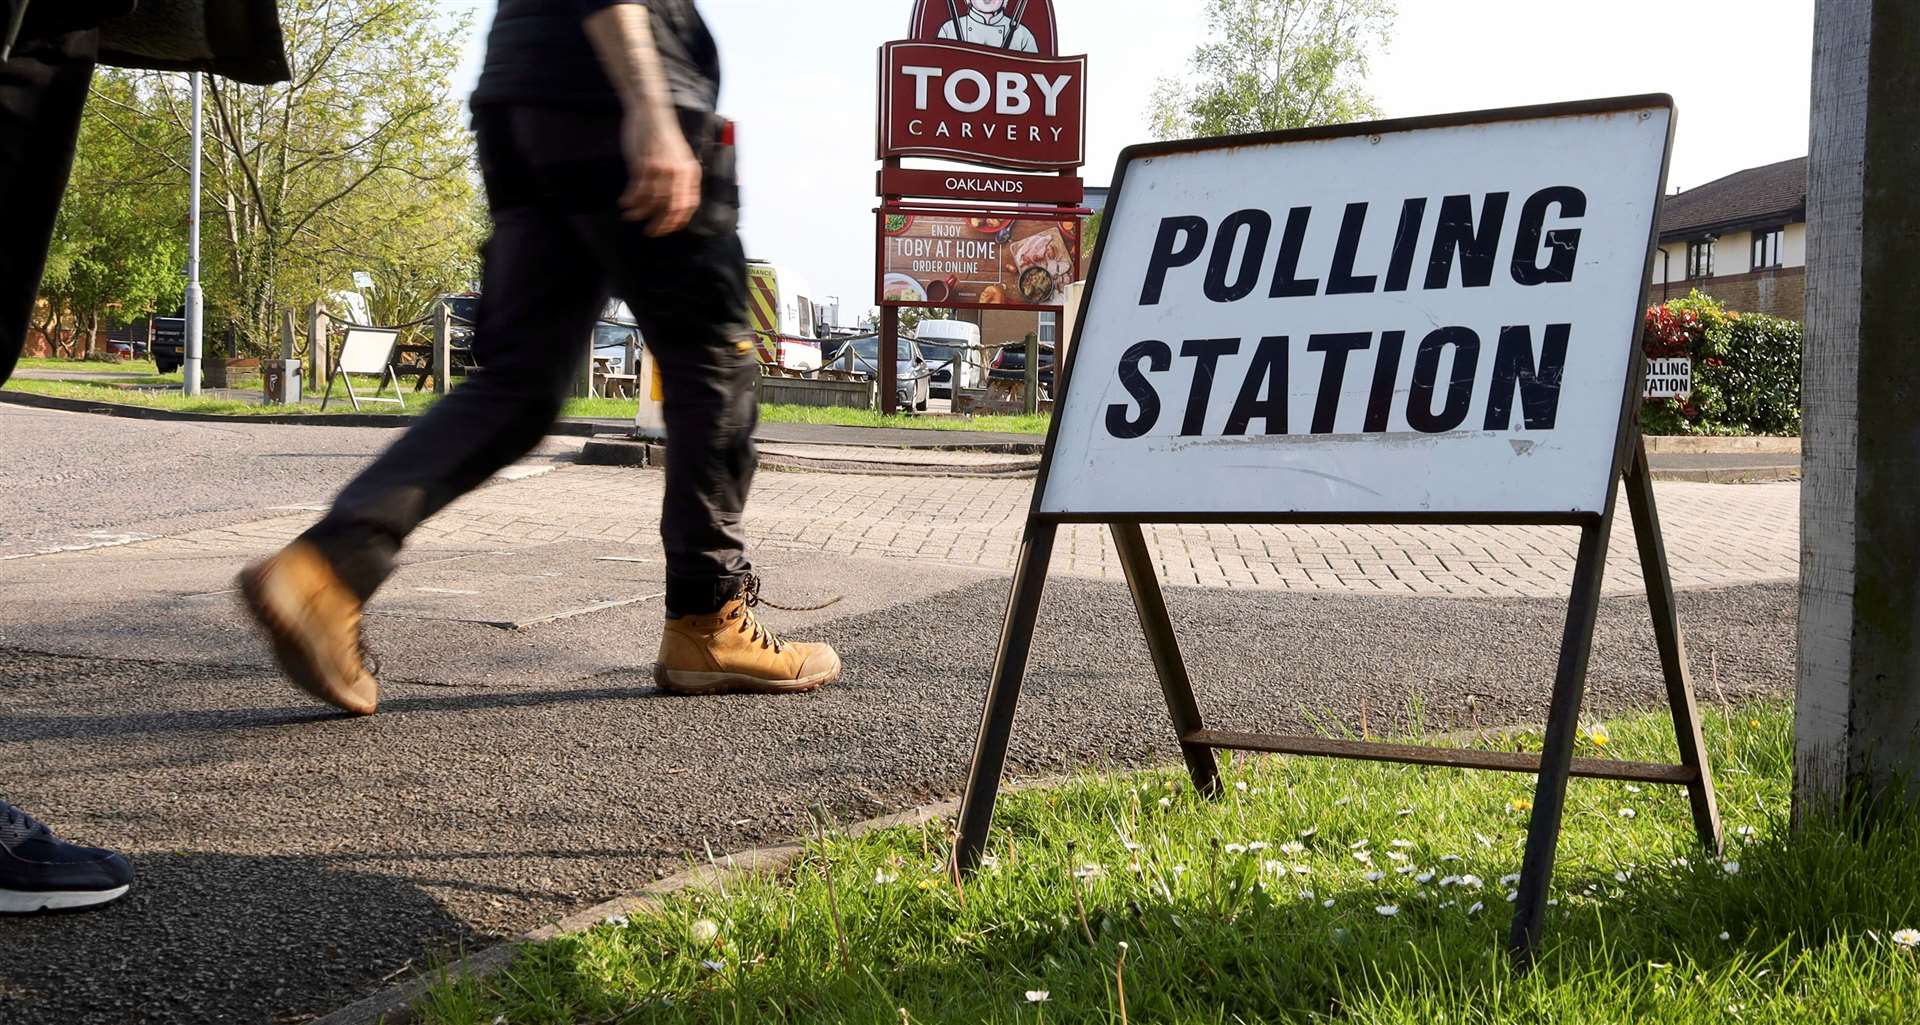 Polling station - local elections in Maidstone and Tunbridge Wells